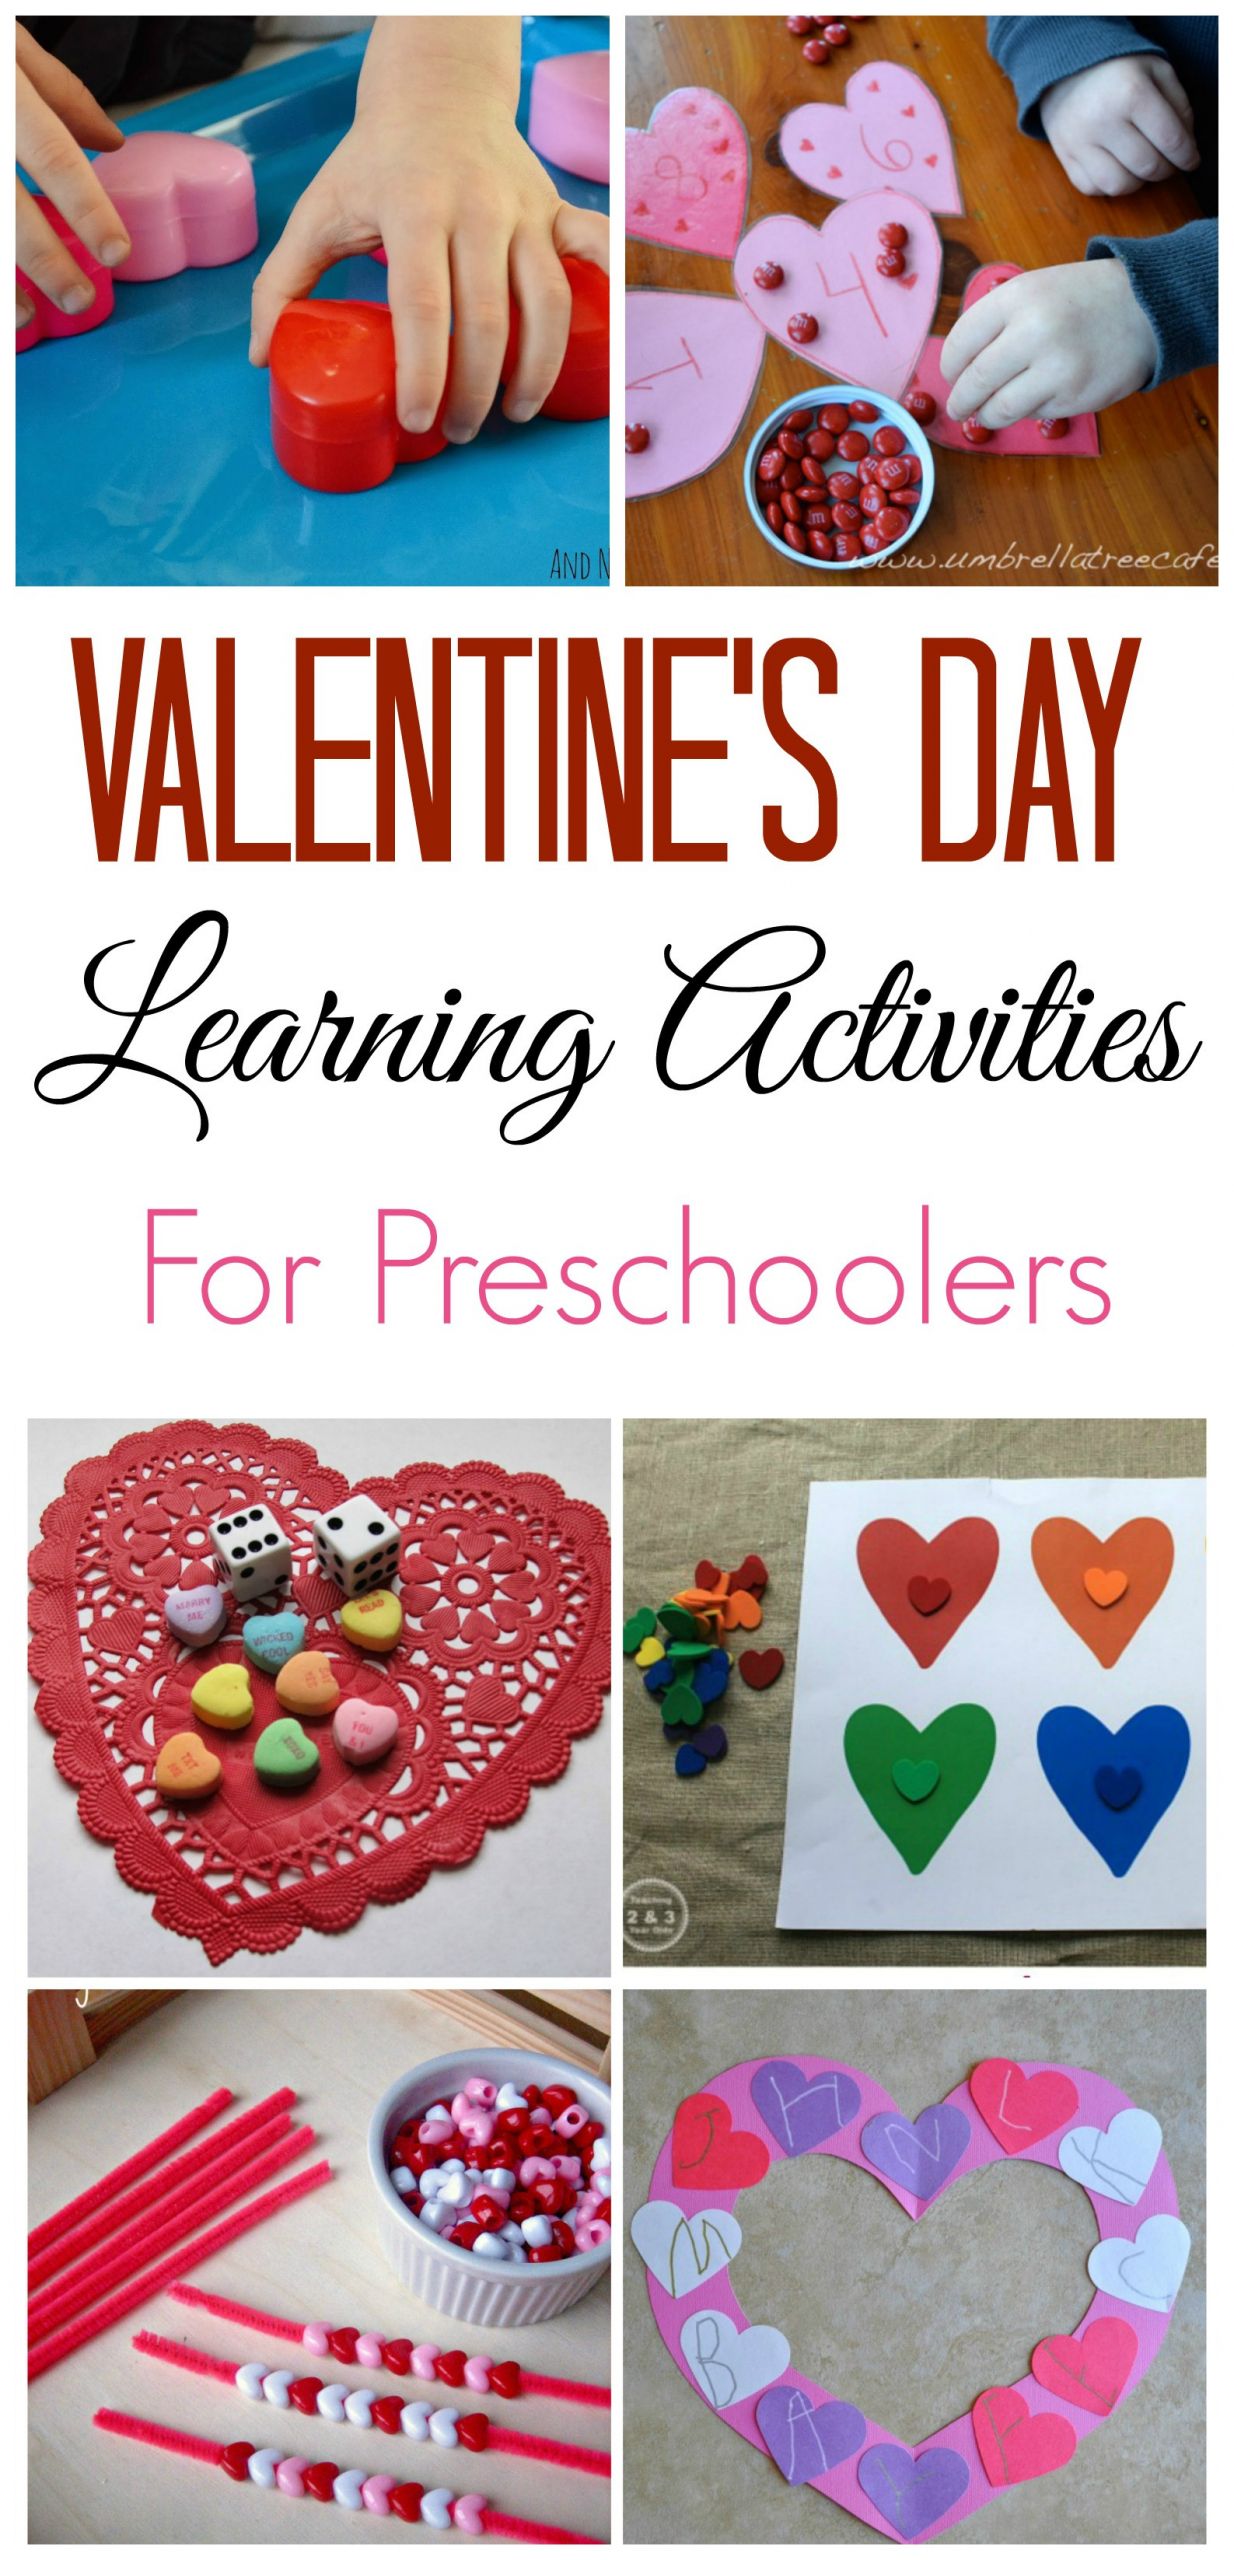 Valentines Day Activities
 Valentine s Day Learning Activities for Preschoolers